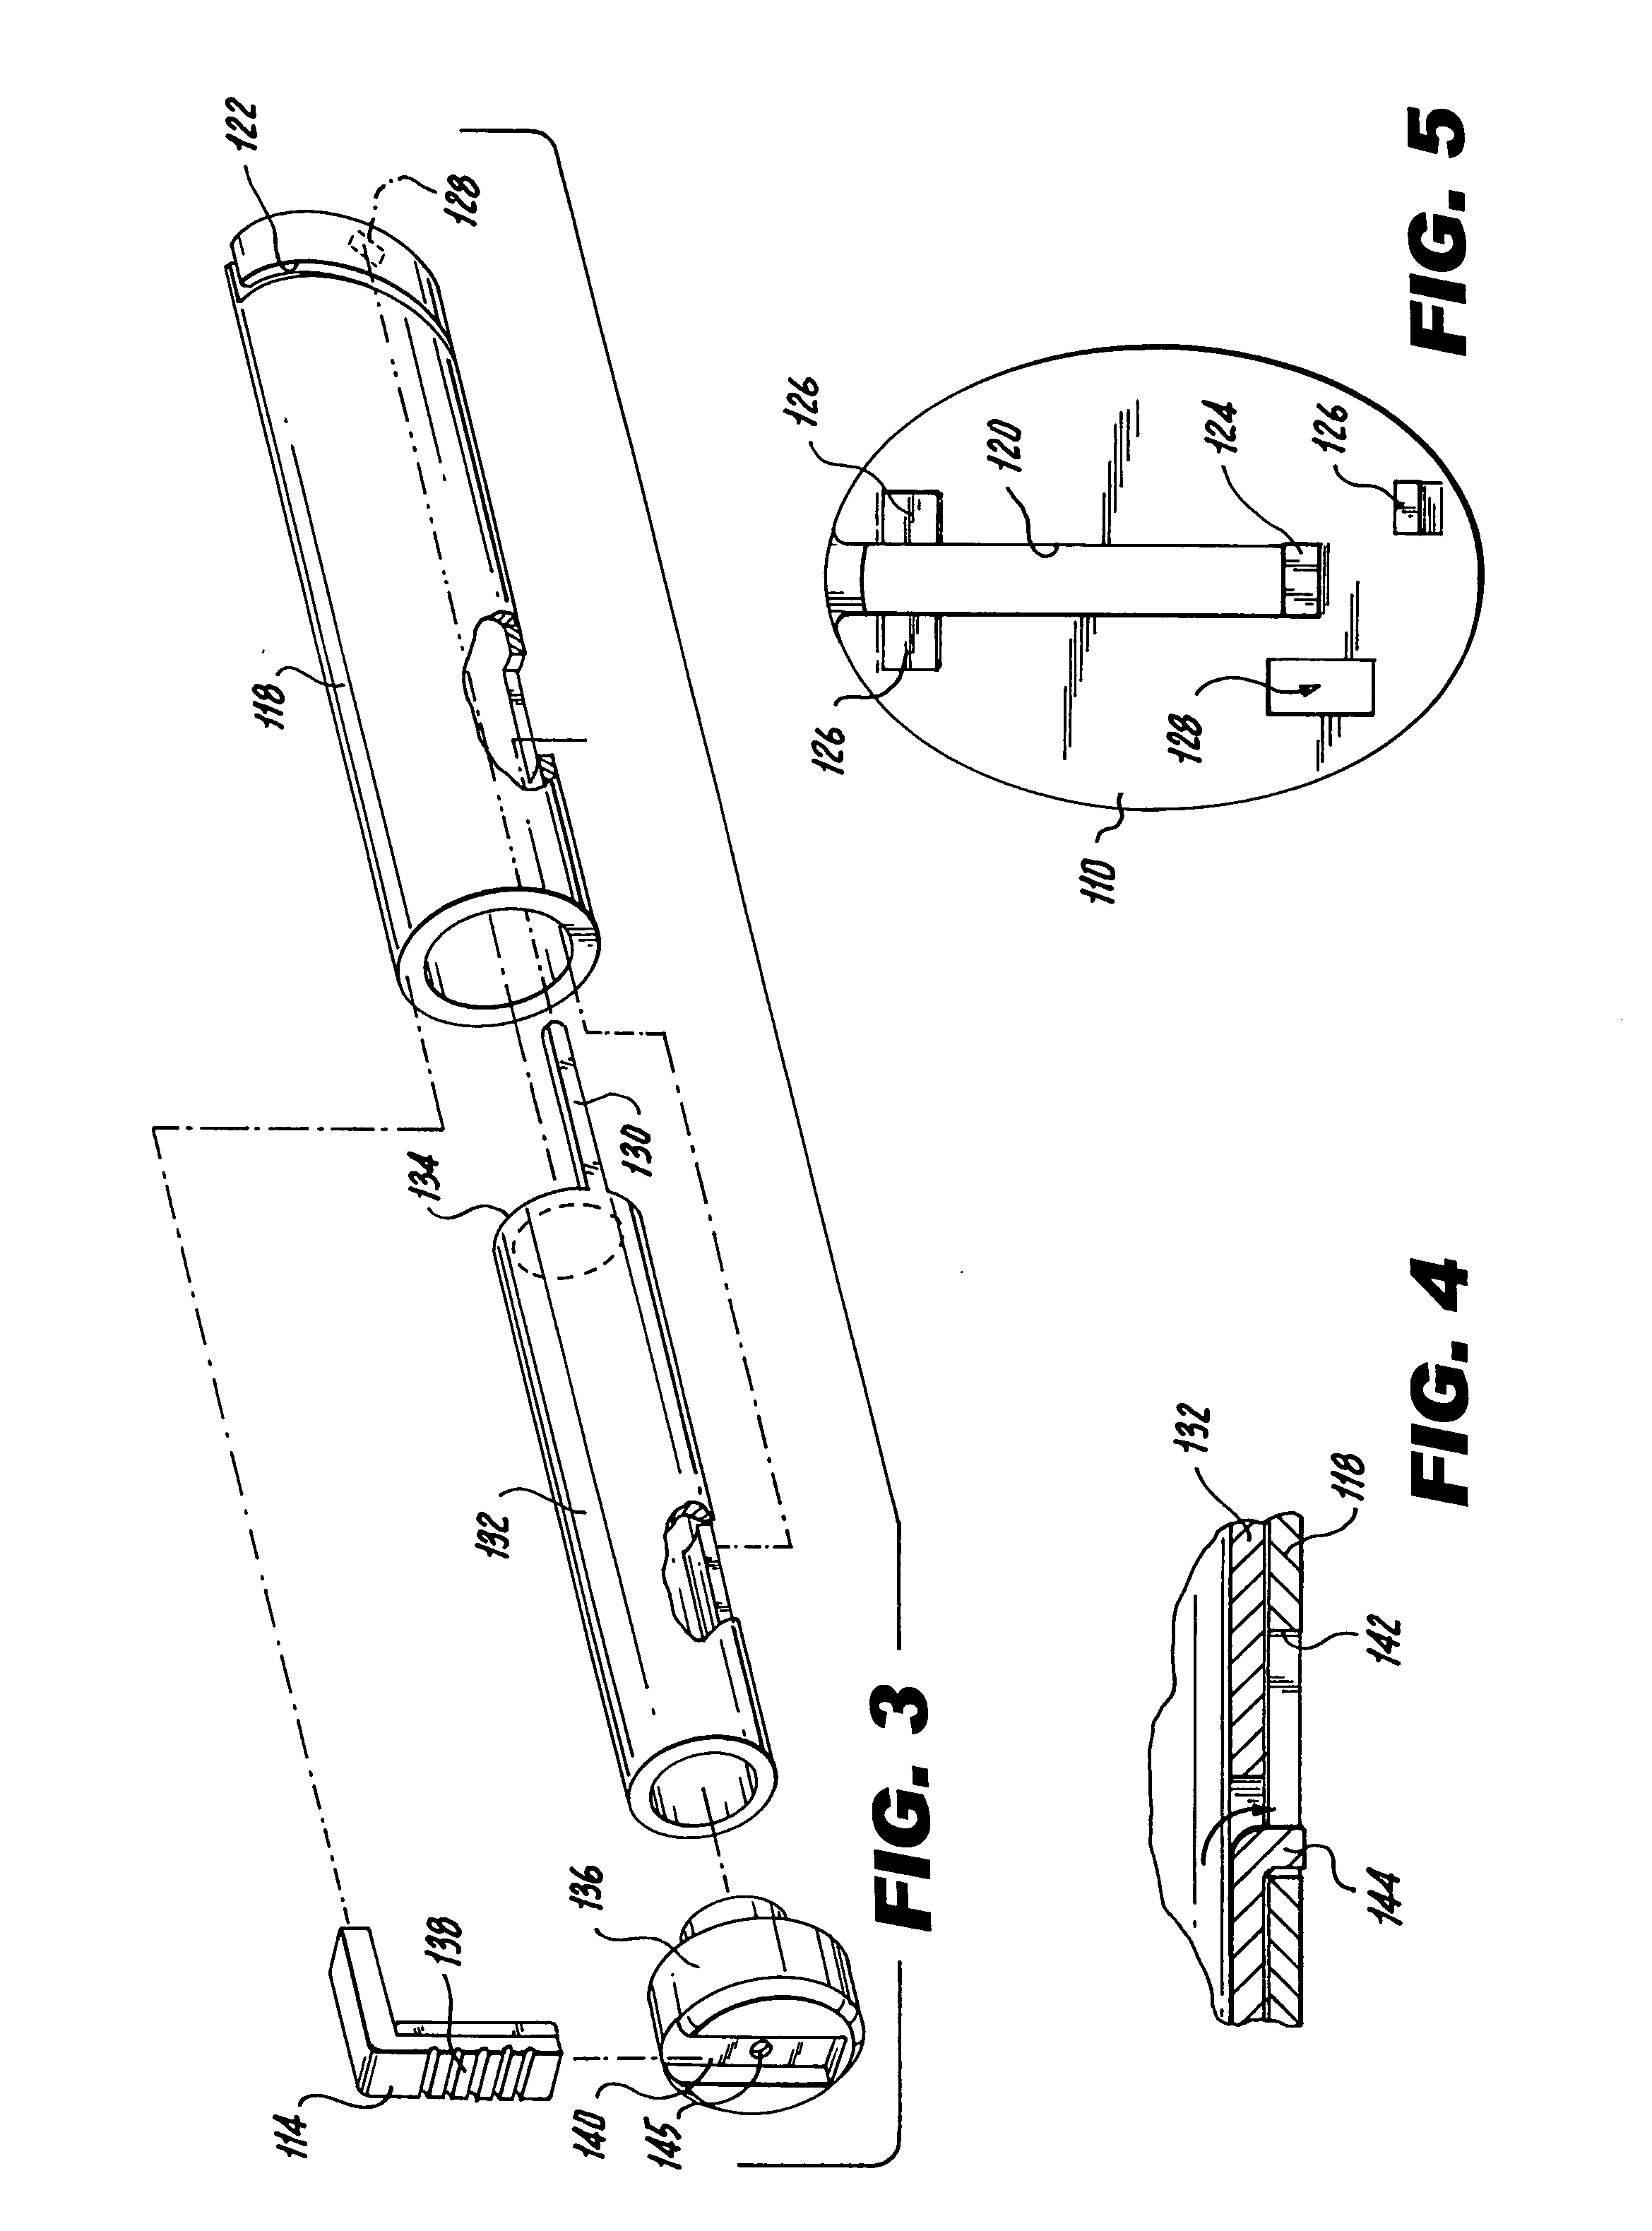 System for securing a suture